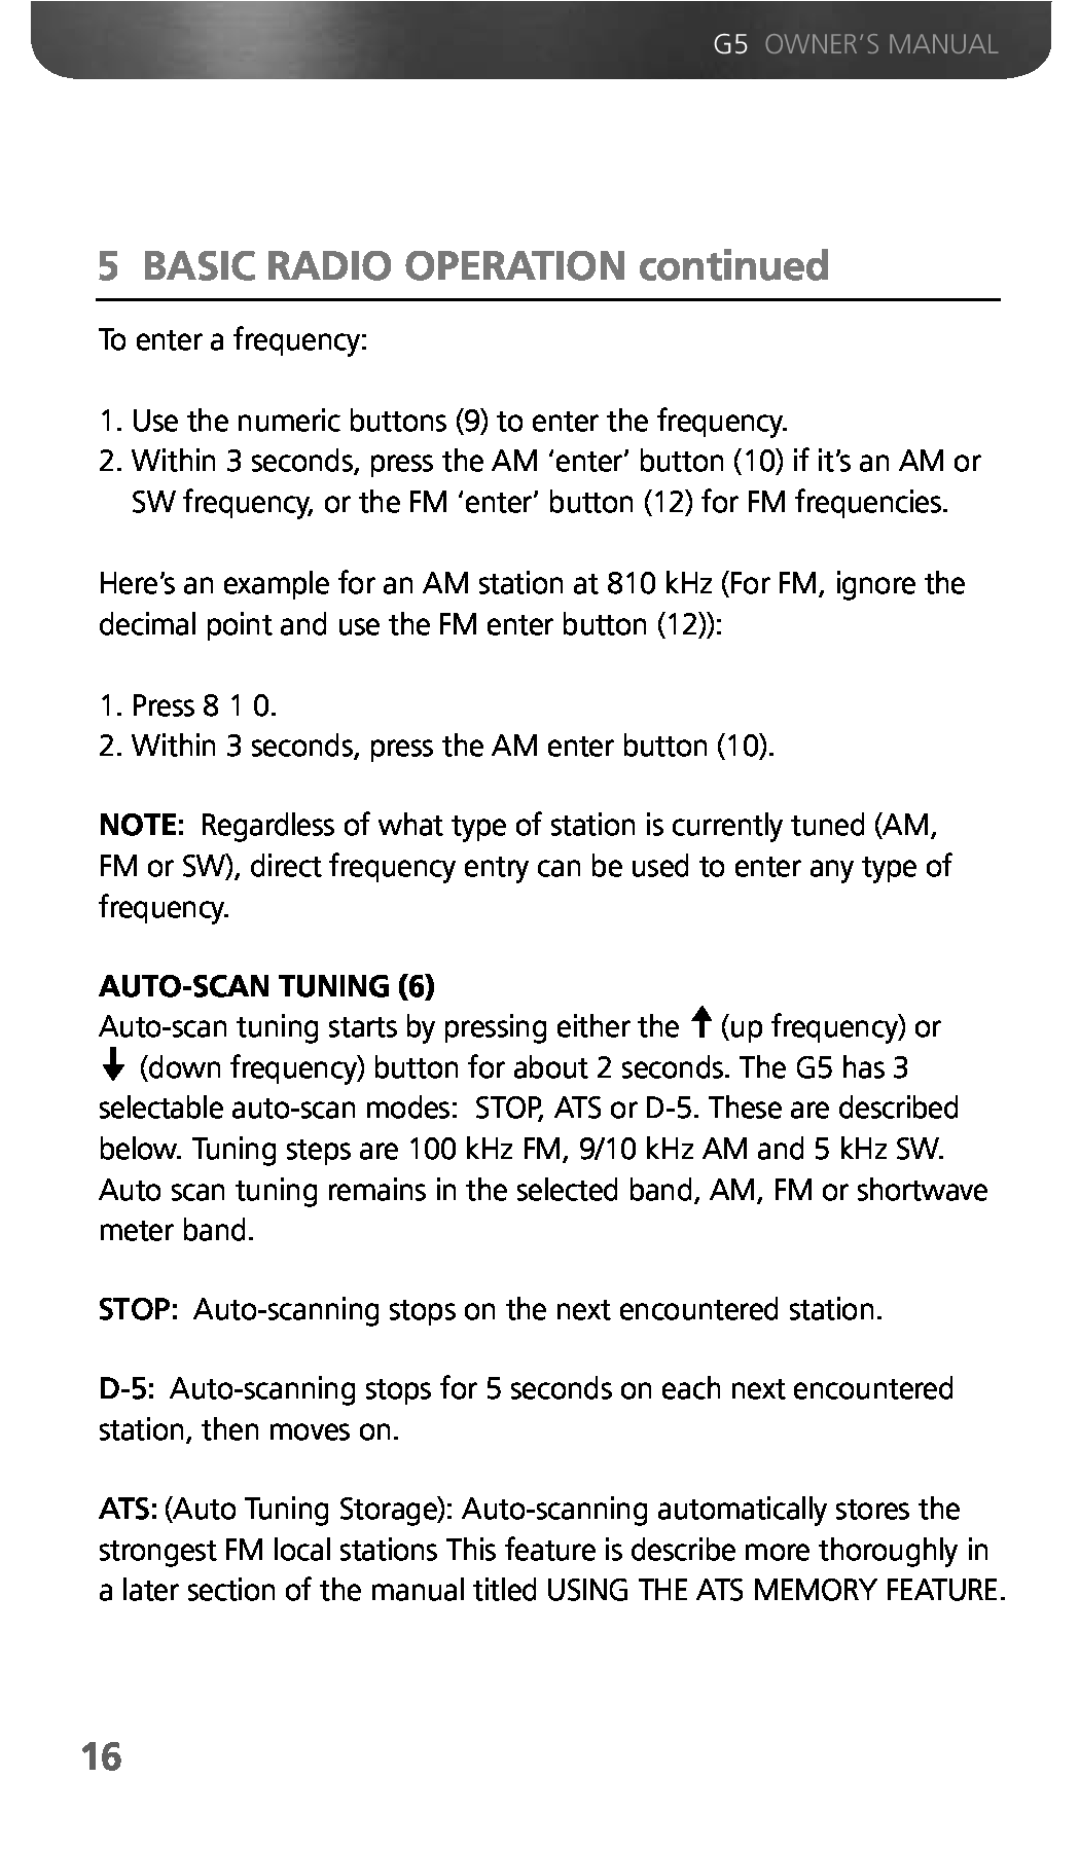 Eton owner manual BASIC RADIO OPERATION continued, G5 OWNER’S MANUAL, Auto-Scan Tuning 